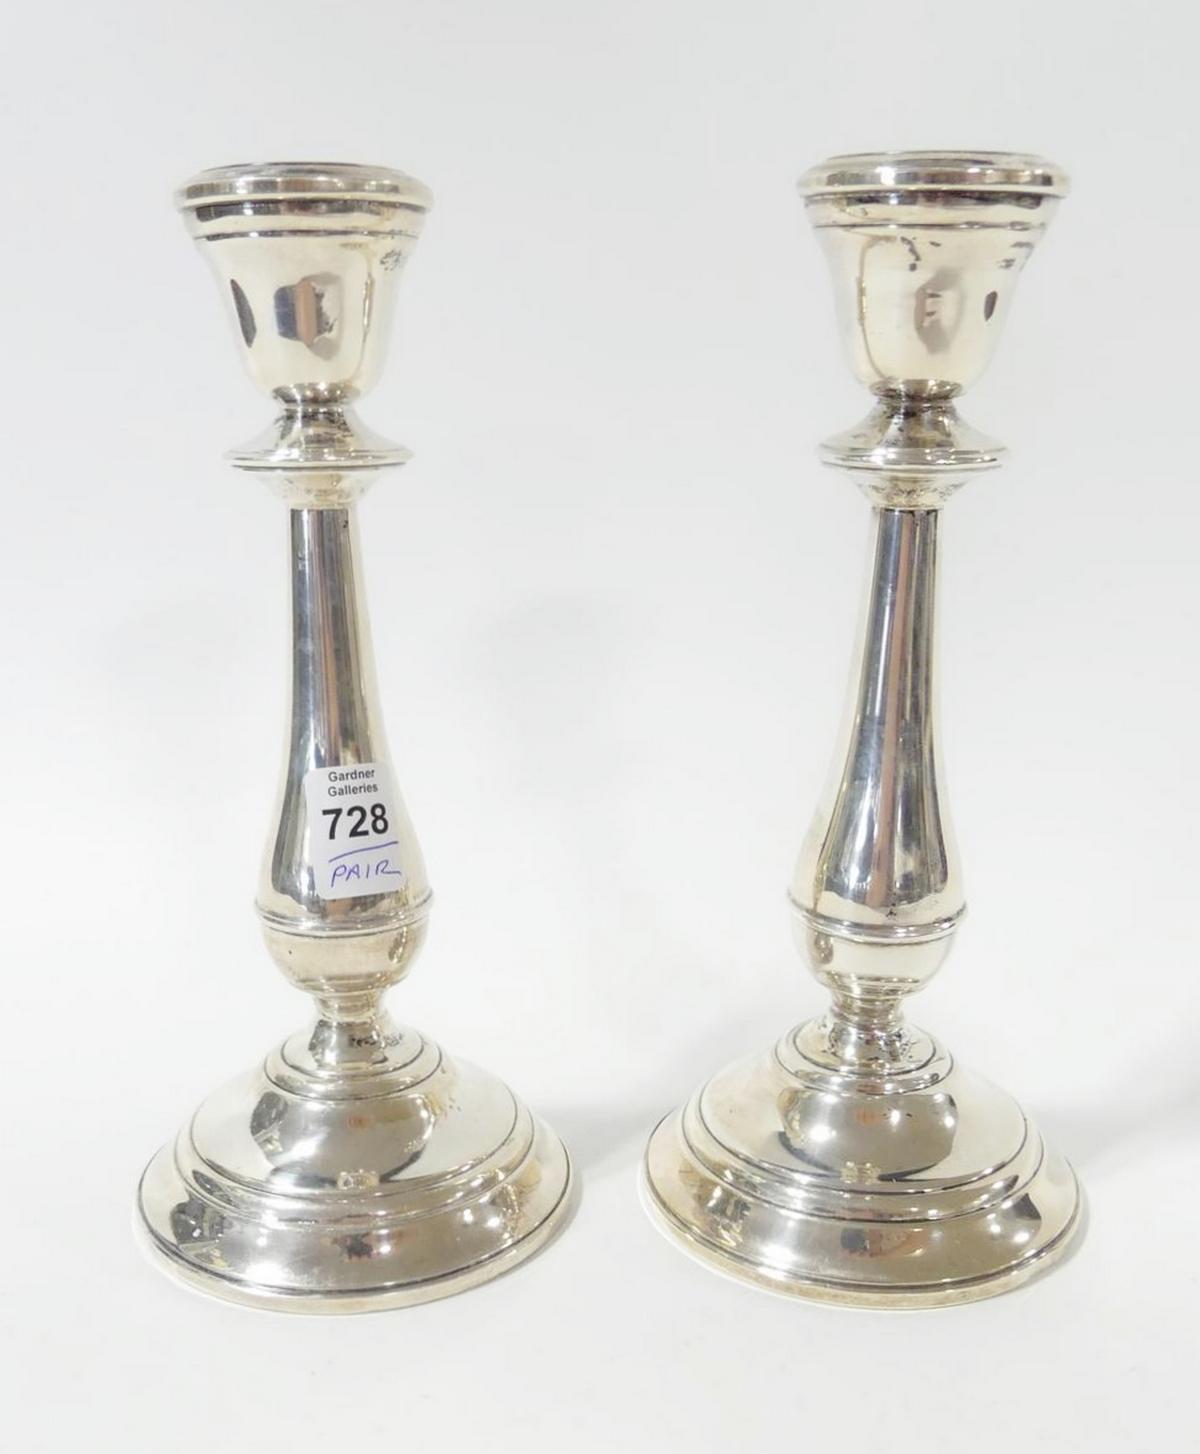 PAIR OF STERLING CANDLESTICKS